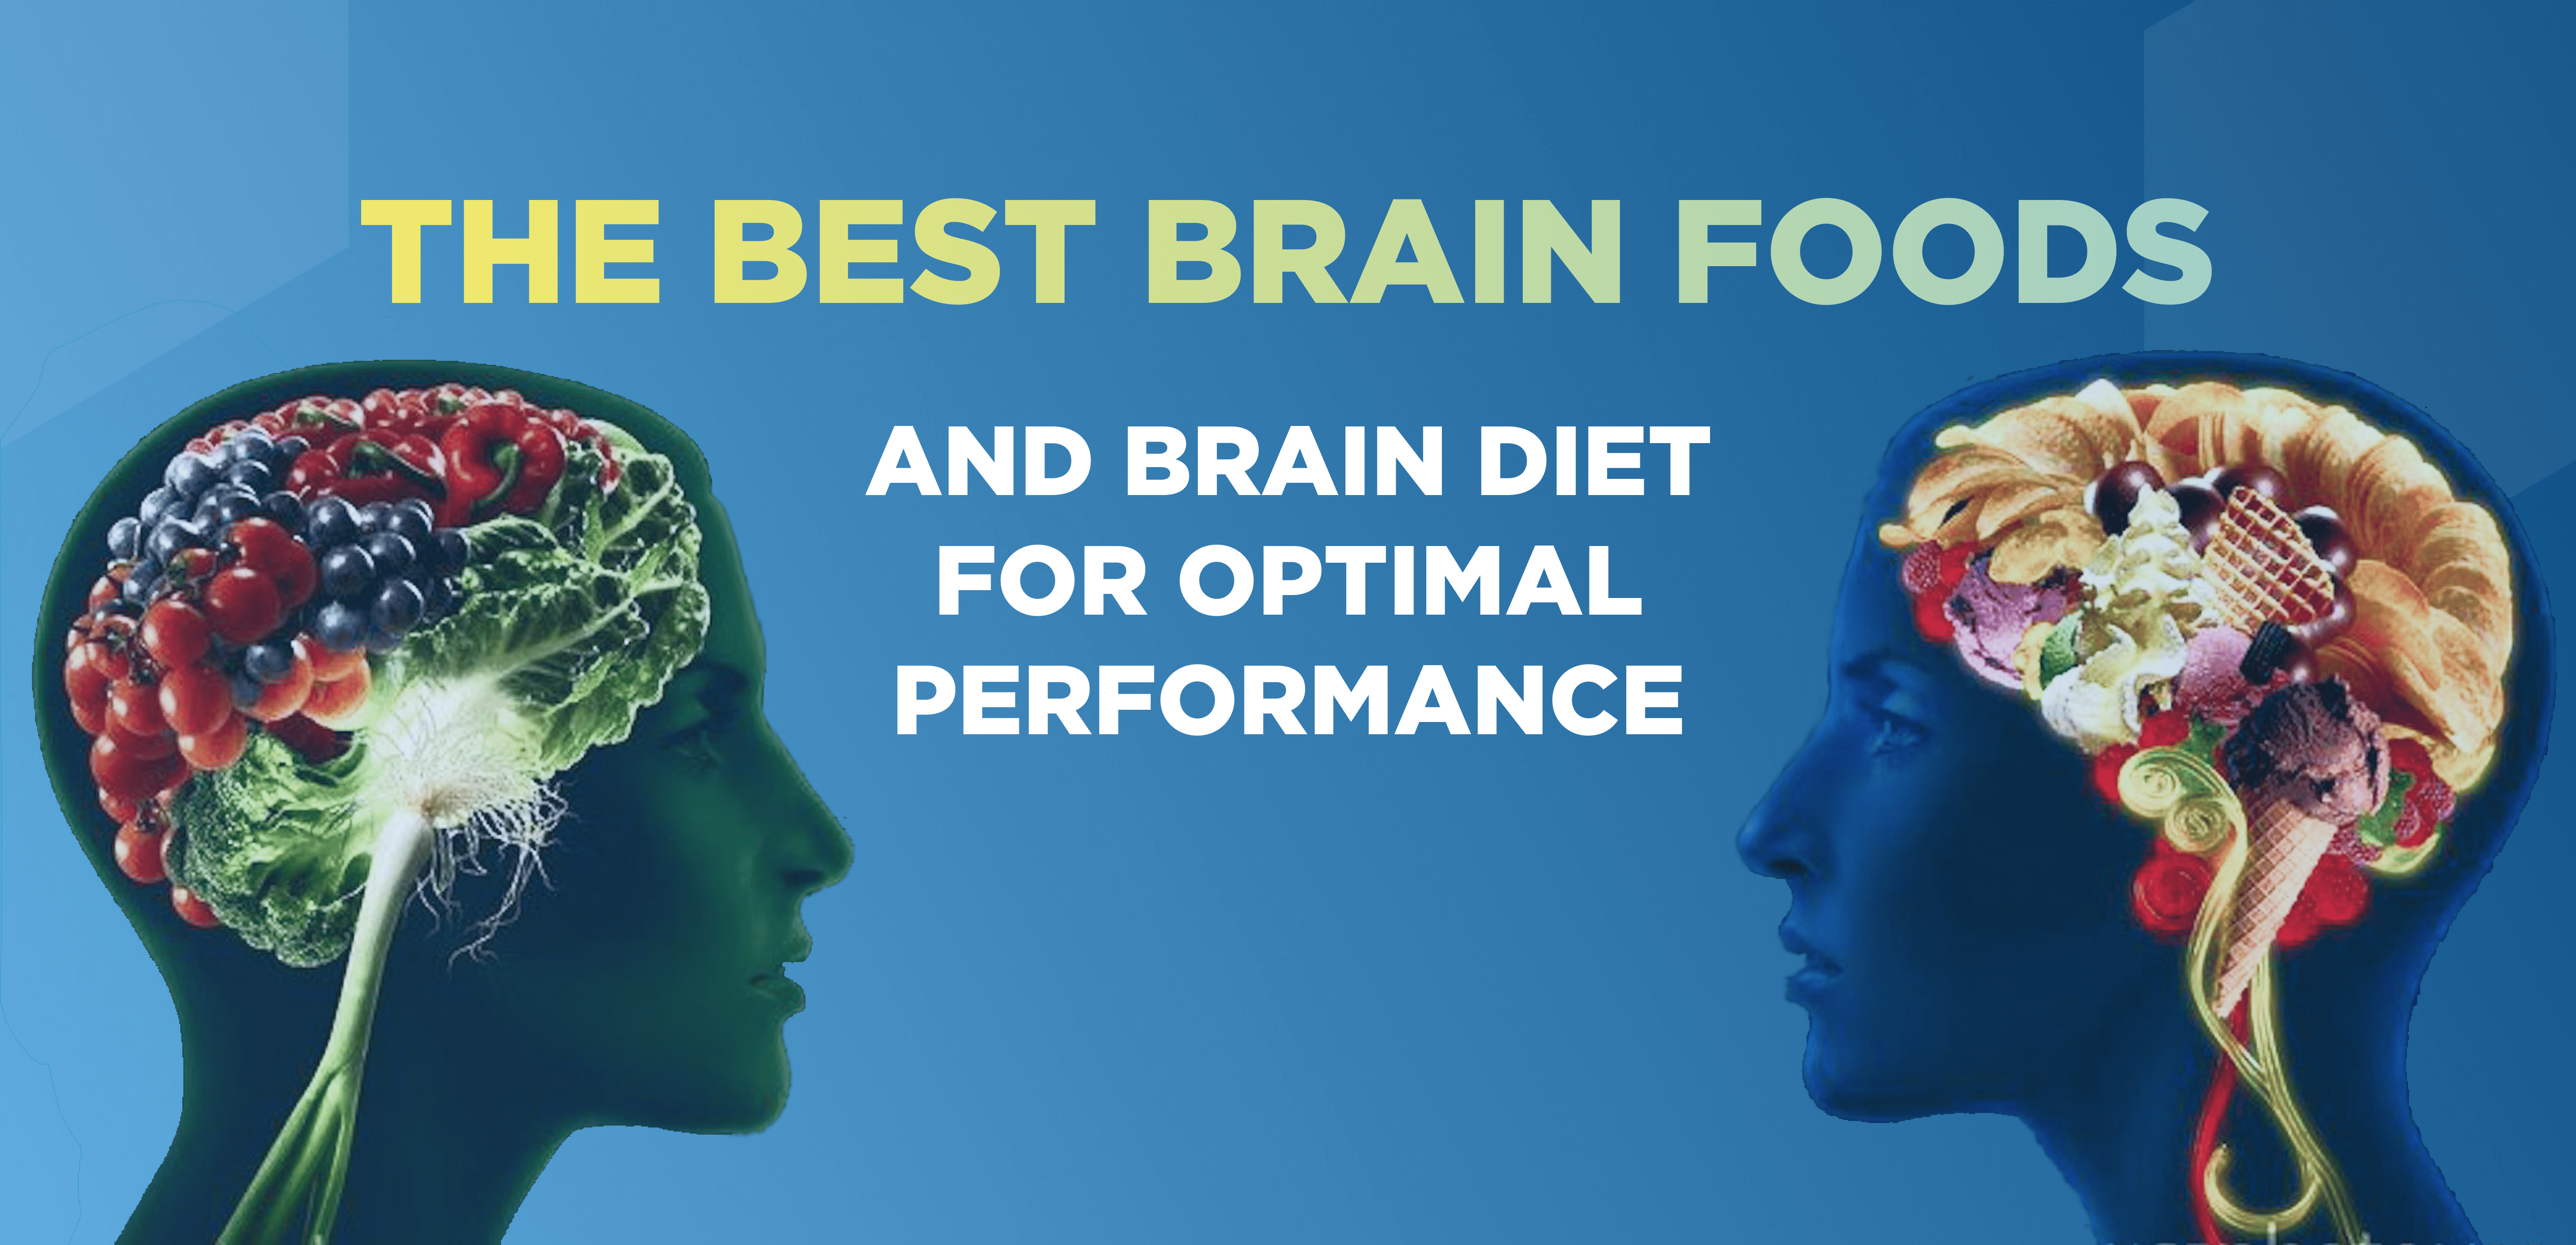 The Best Brain Foods and Brain Diet for Optimal Performance